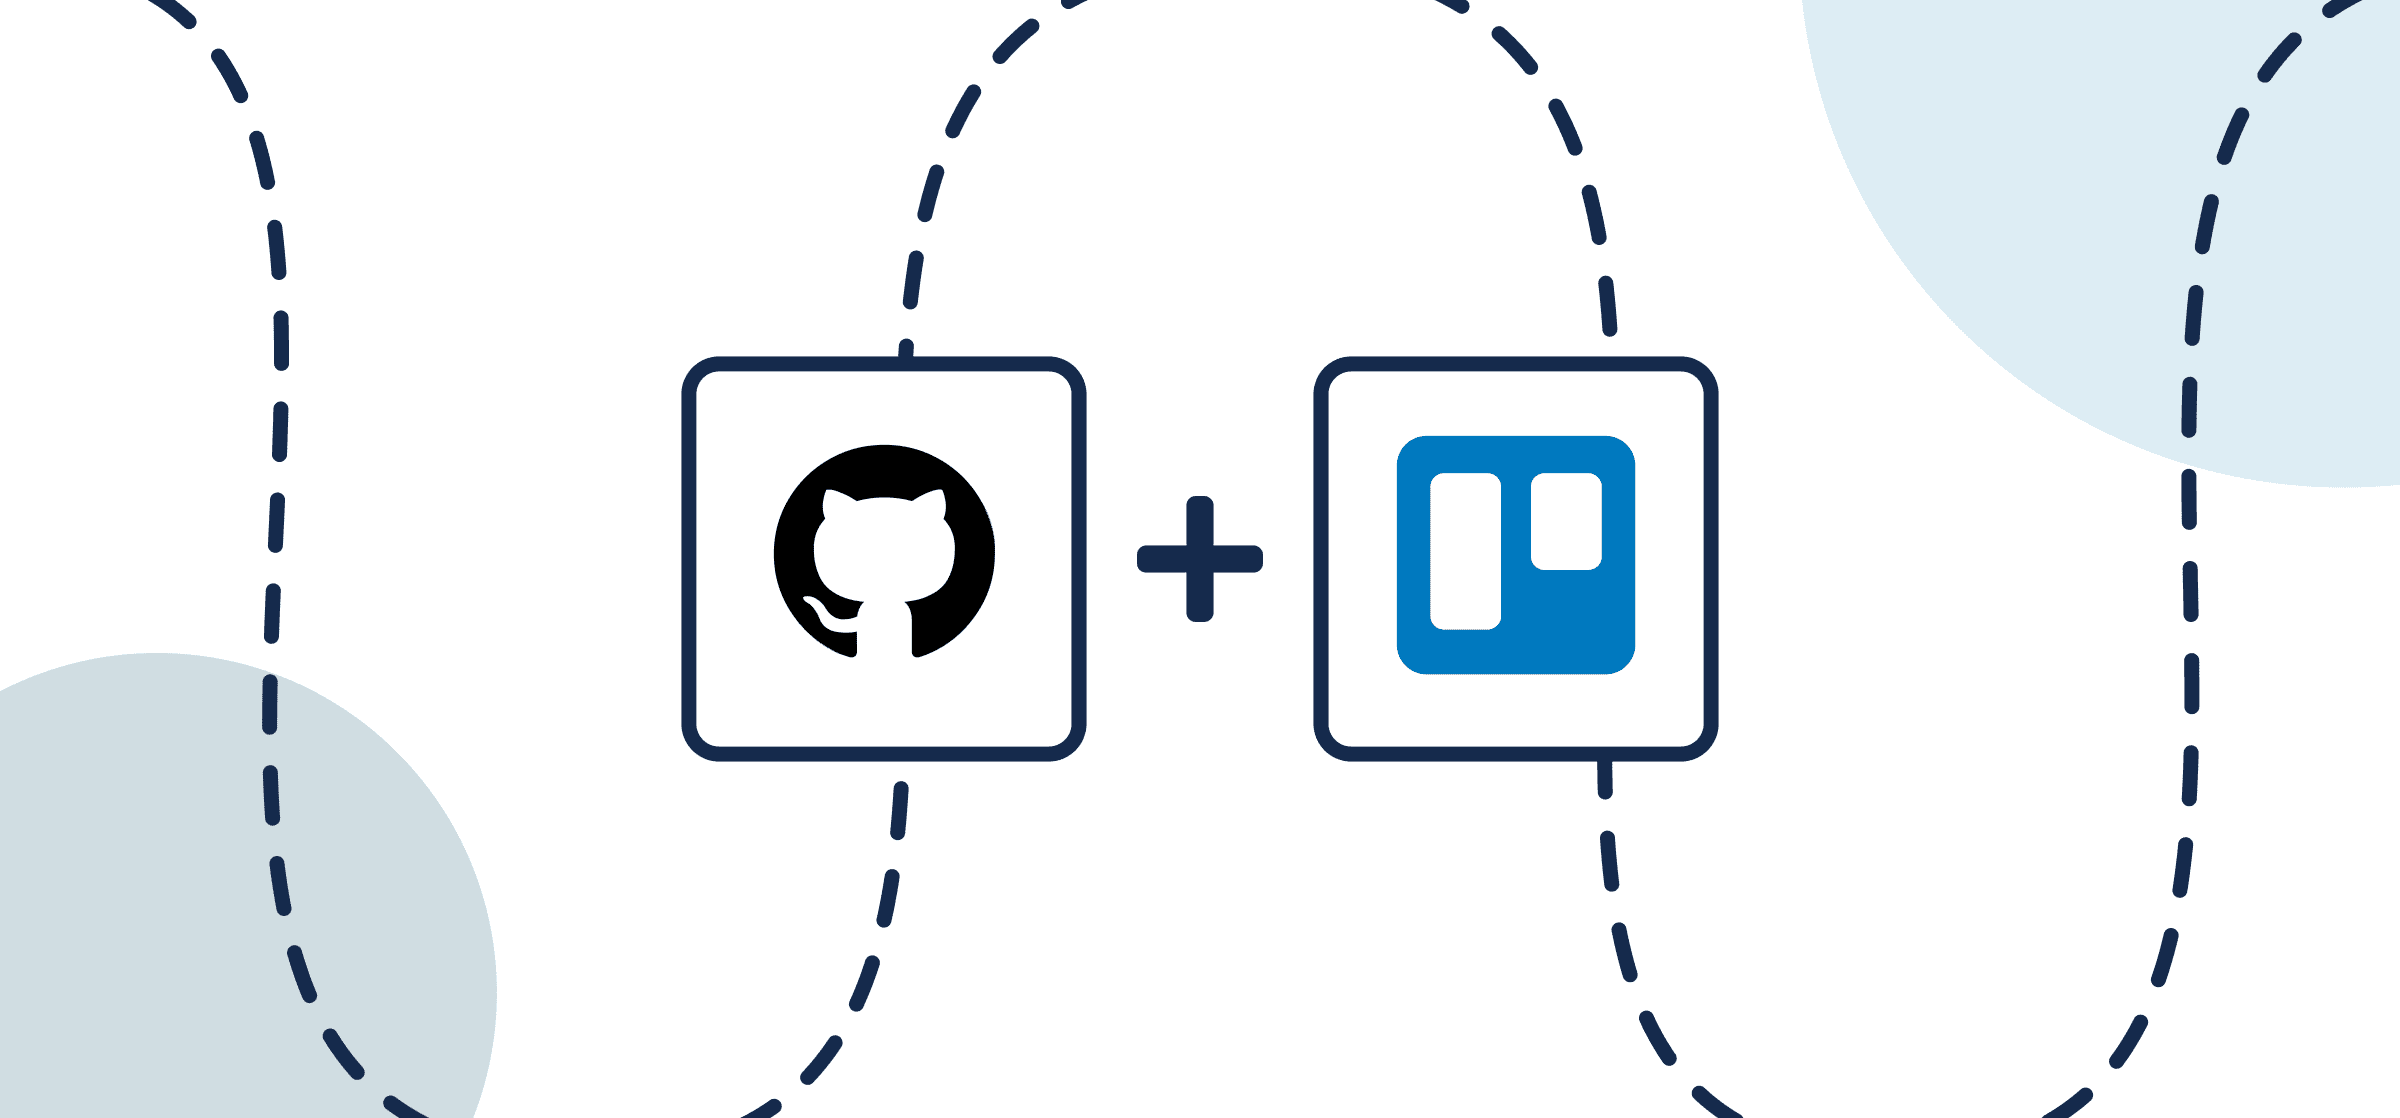 Featured image illustrating a step-by-step guide on syncing GitHub issues to Trello cards using Unito, depicted by the connected logos of GitHub and Trello through circles and dotted lines.